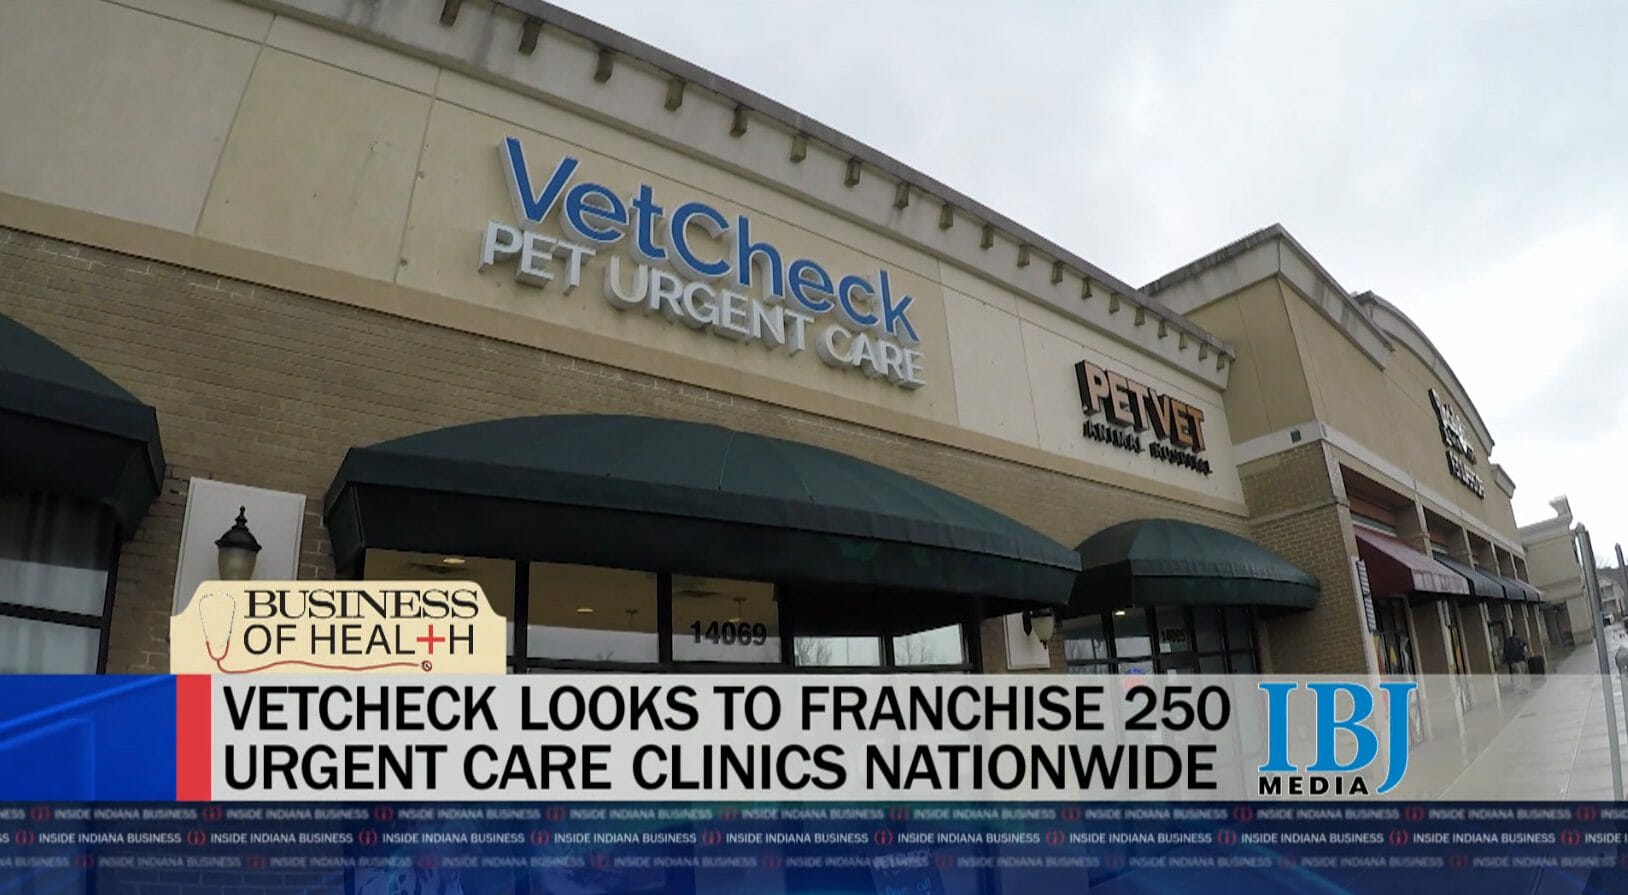 VetCheck looks to franchise 250 urgent care clinics nationwide